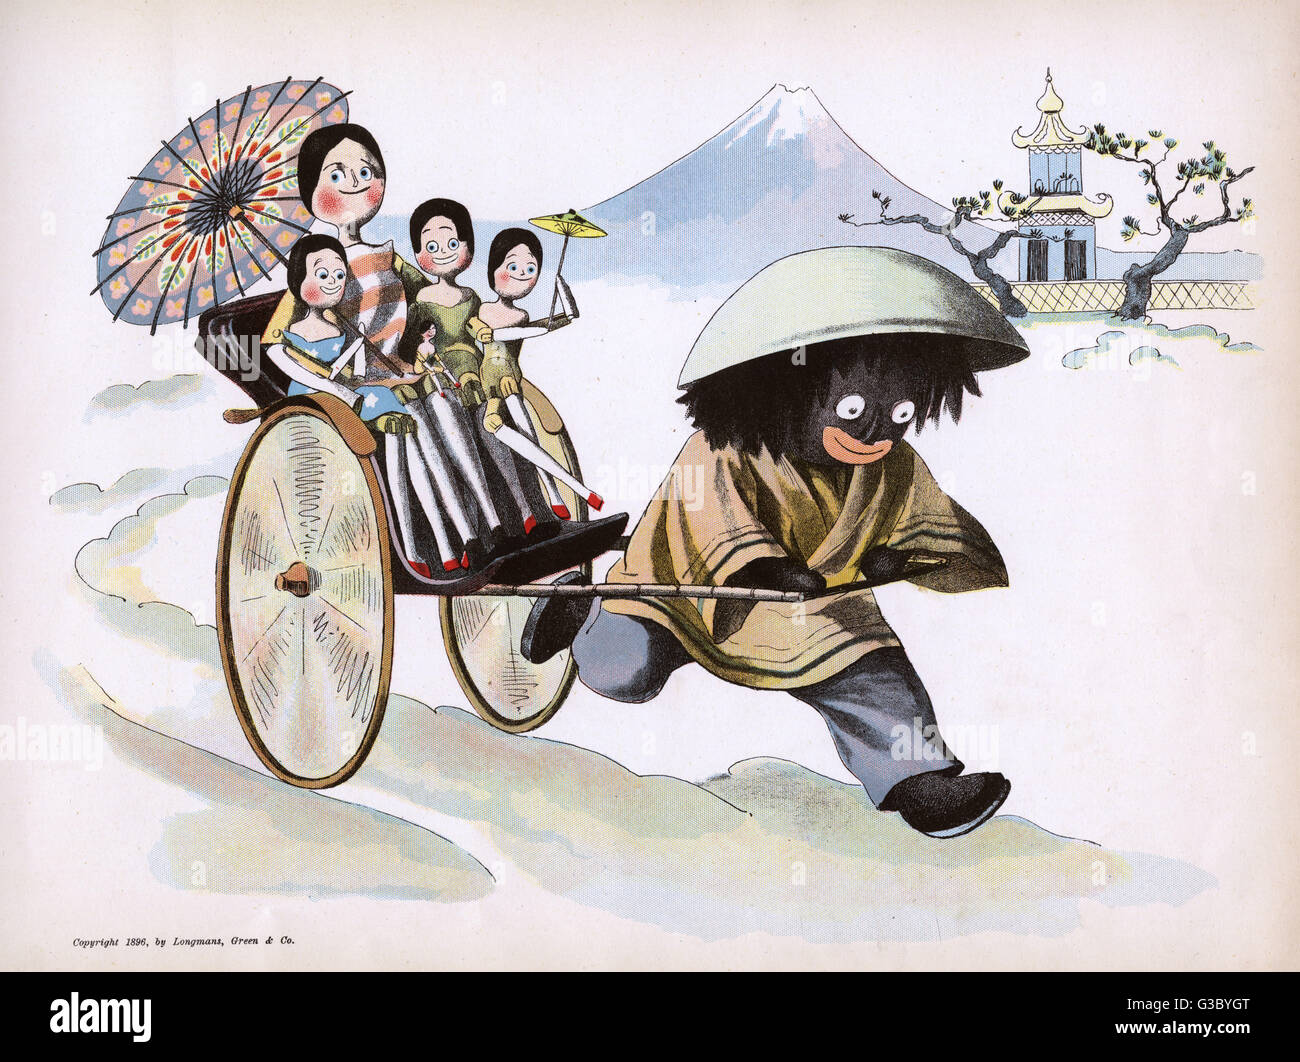 Golliwogg pulls the peg dolls in a rickshaw. The book charts Golliwogg's adventures with his dutch peg doll friends Peggy, Weg, Meg, Sarah Jane and the dinky little Midget. This is the 2nd title in a 13-book series of Golliwogg books written by mother Ber Stock Photo